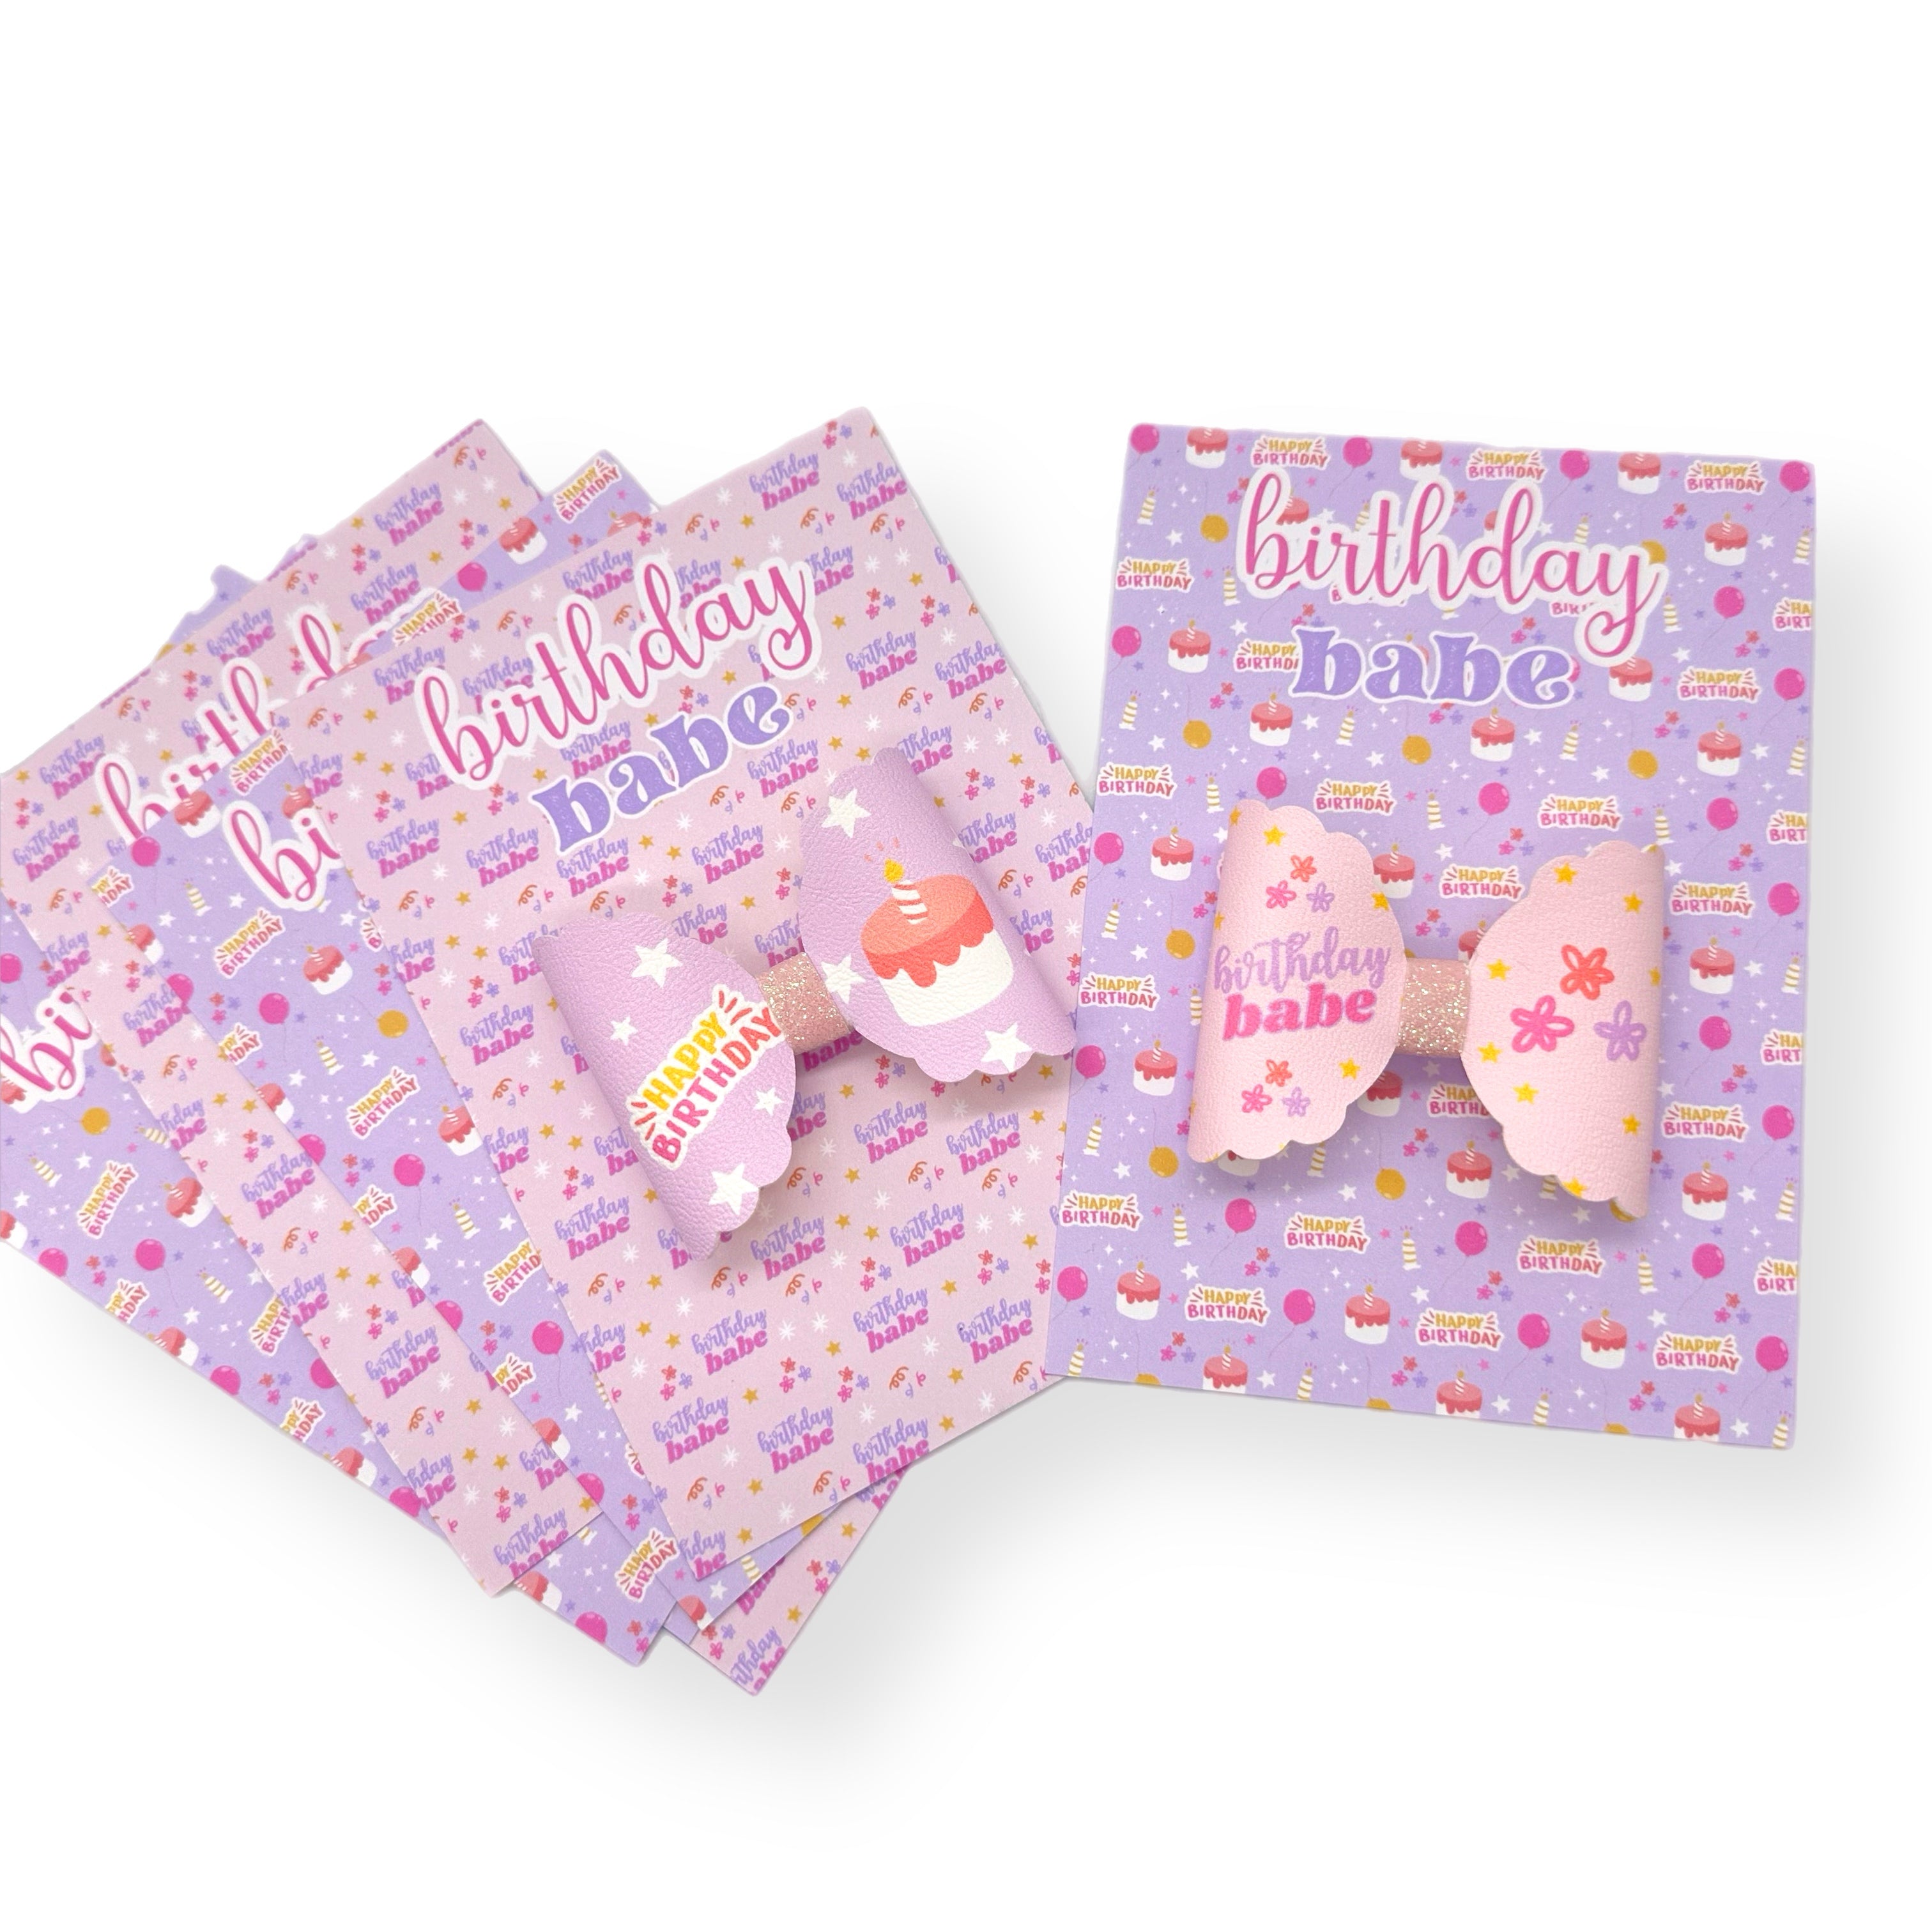 Birthday Babe Bow Cards- Pack of 4